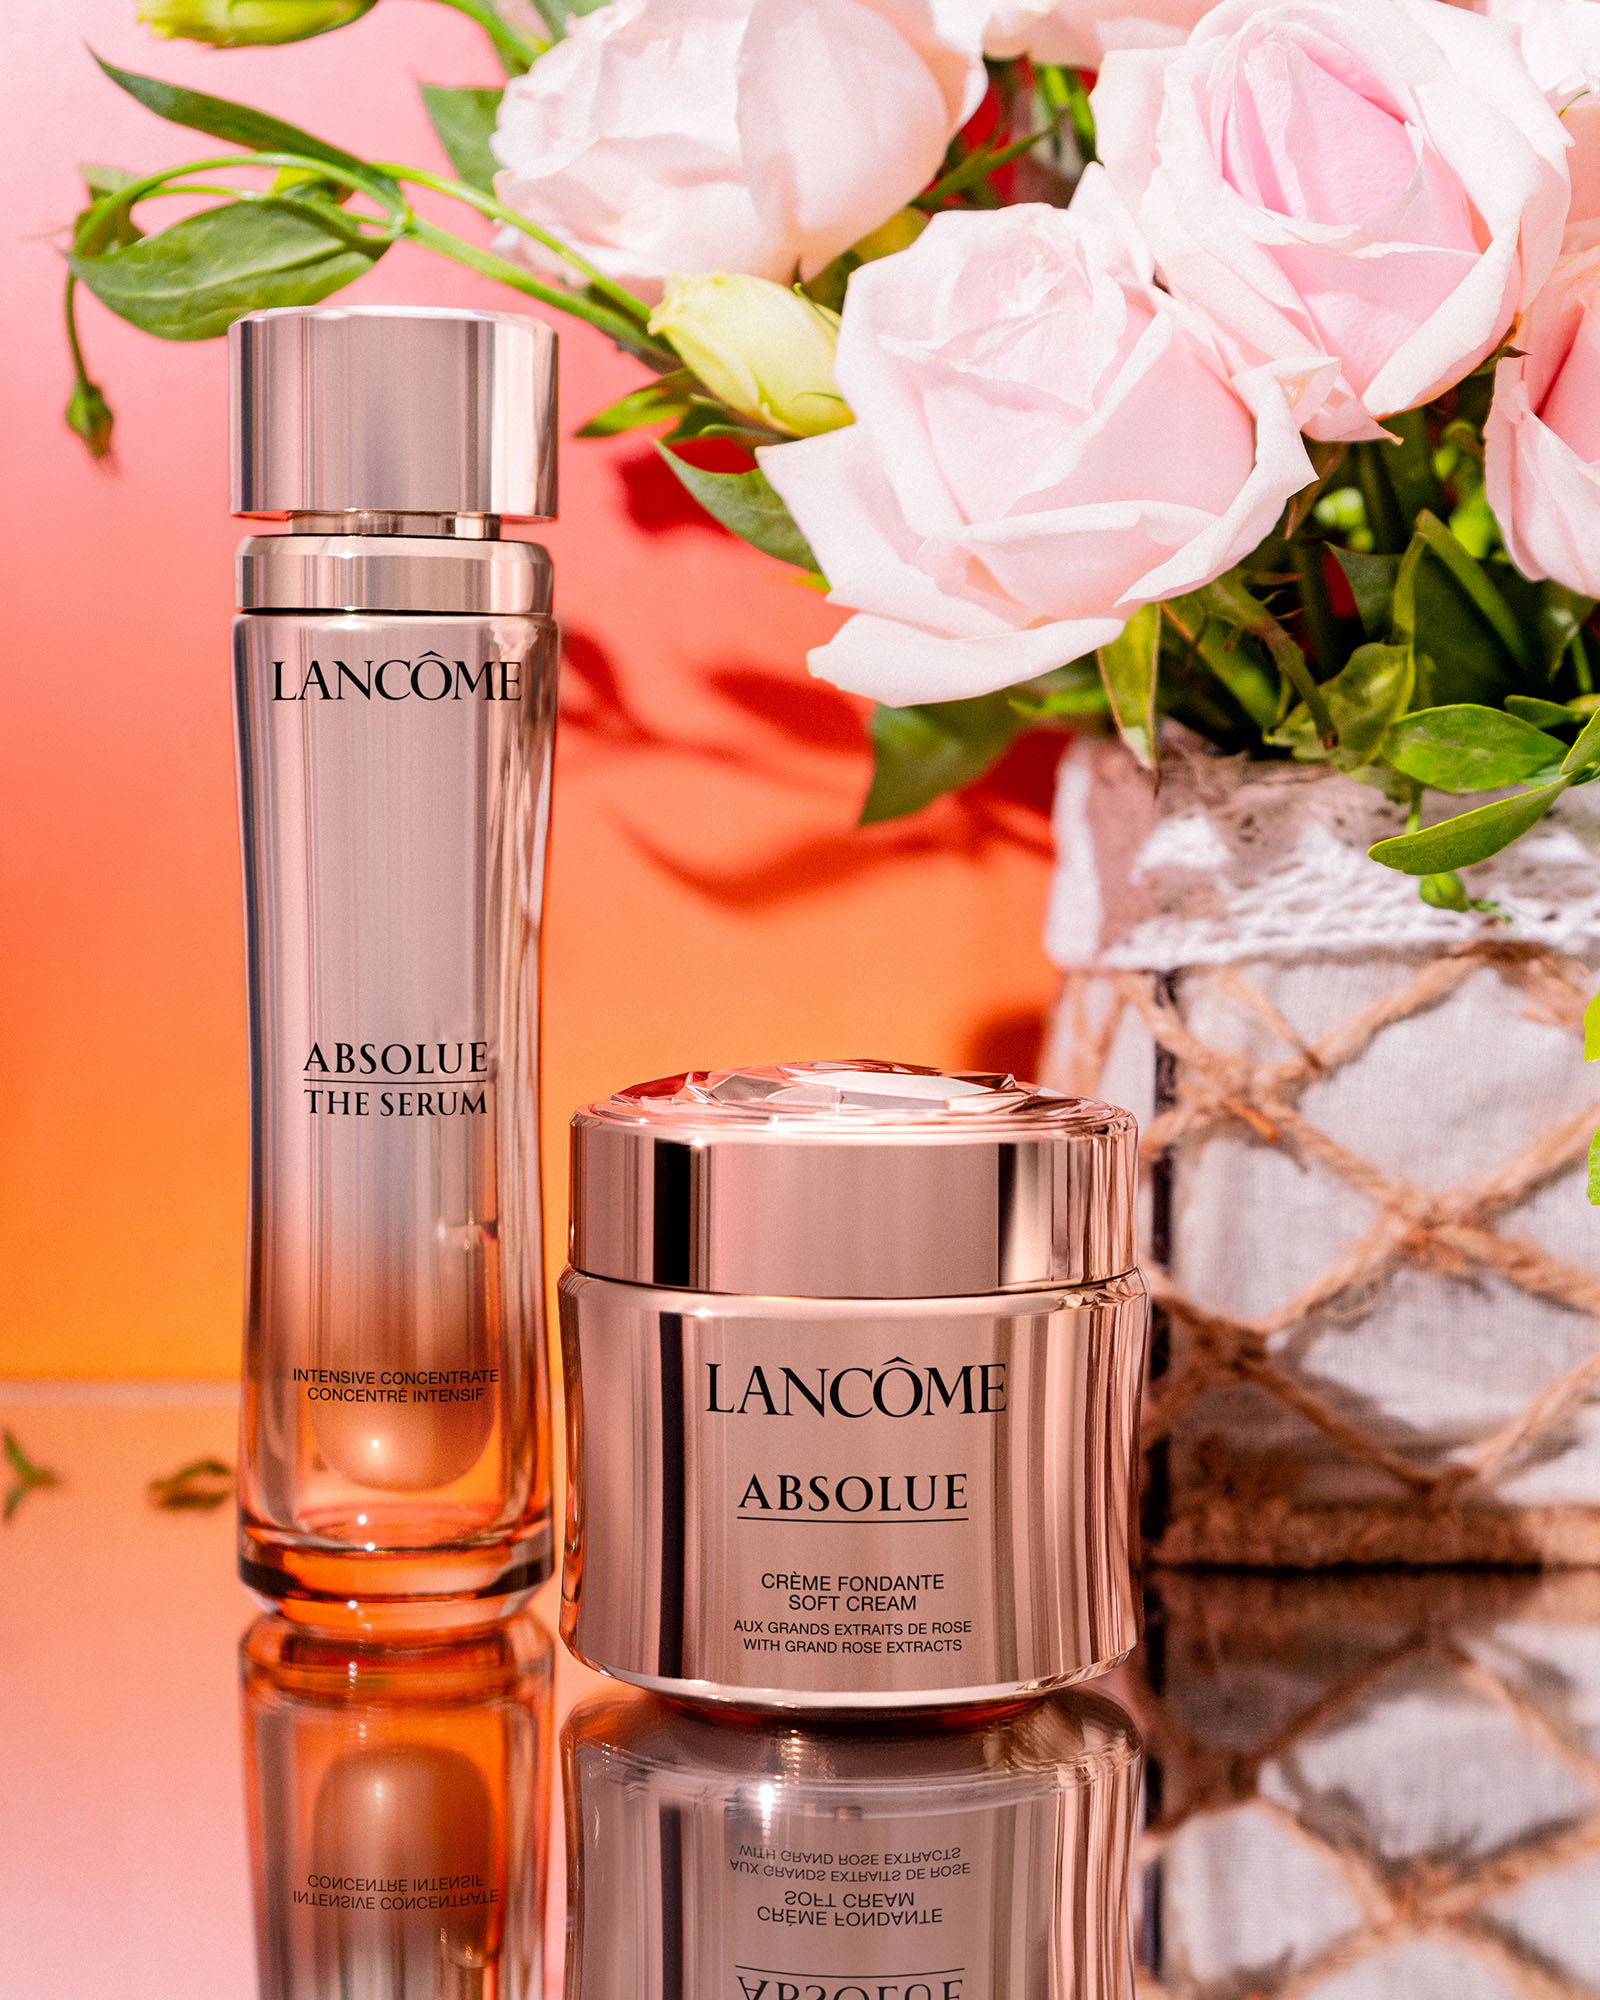 One of my best beauty investments in 2023 is the Lancome Absolue Soft Cream and Serum